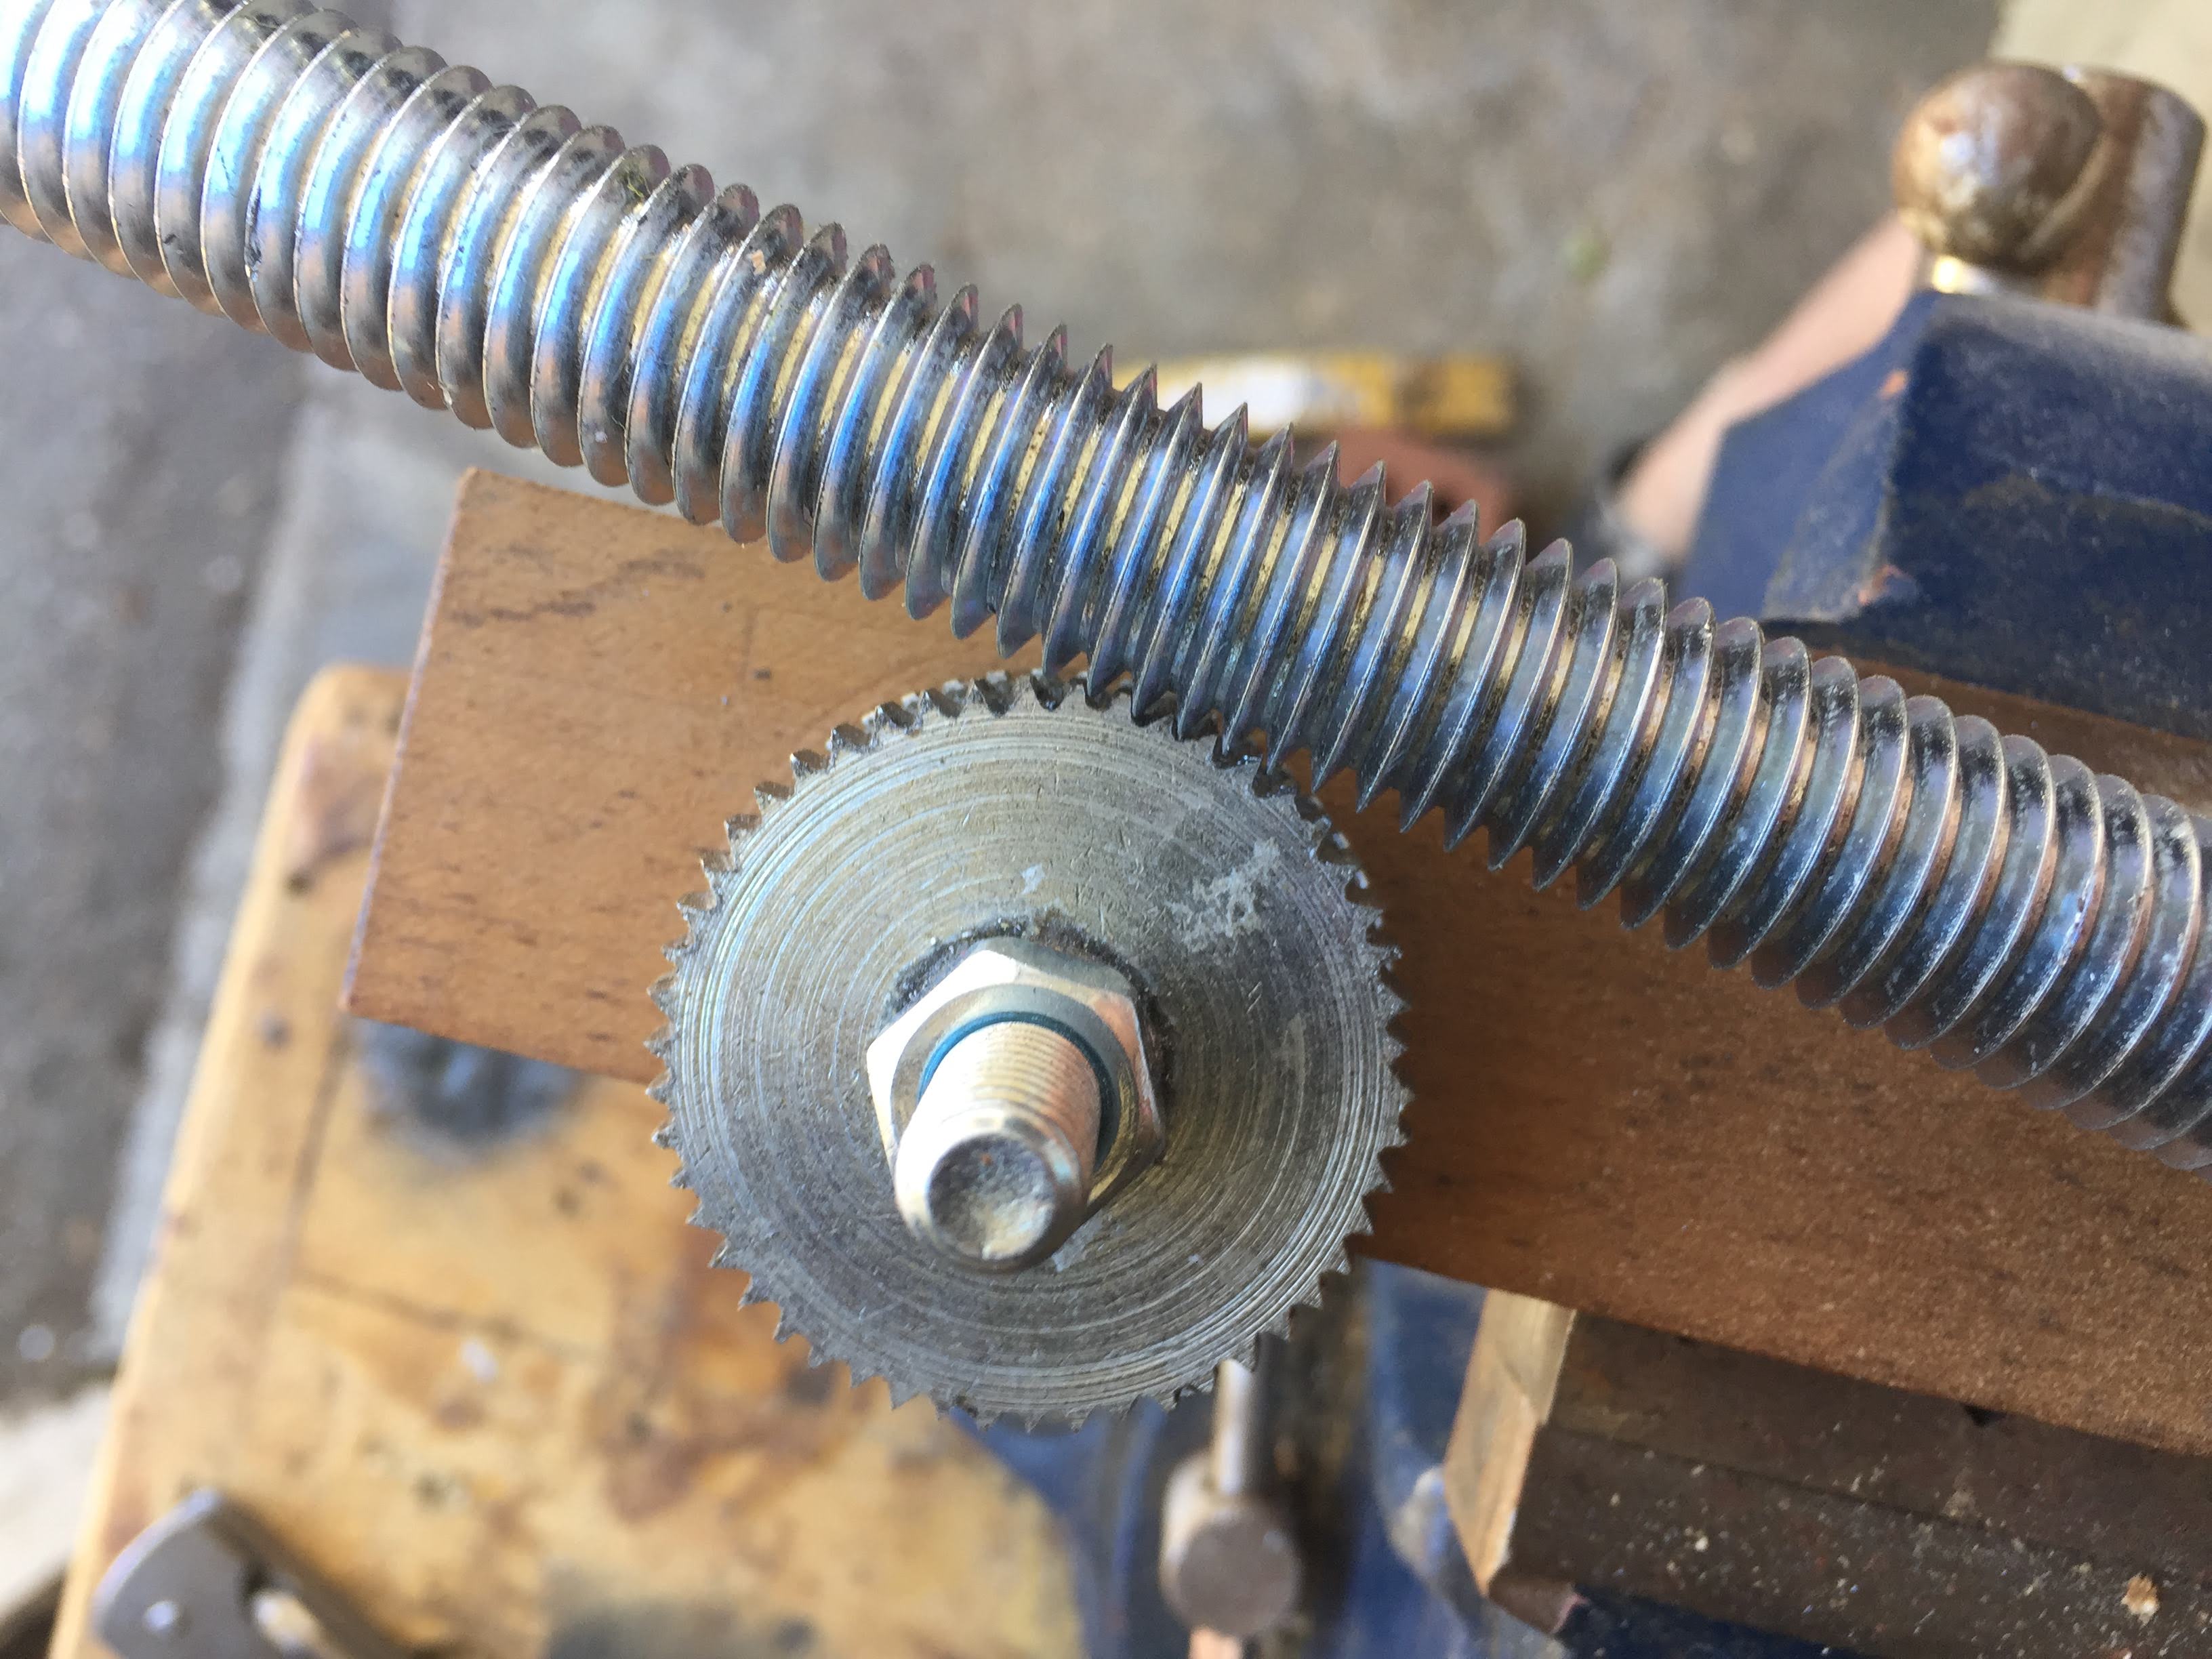 gear being tested with threaded rod (making a worm gear)